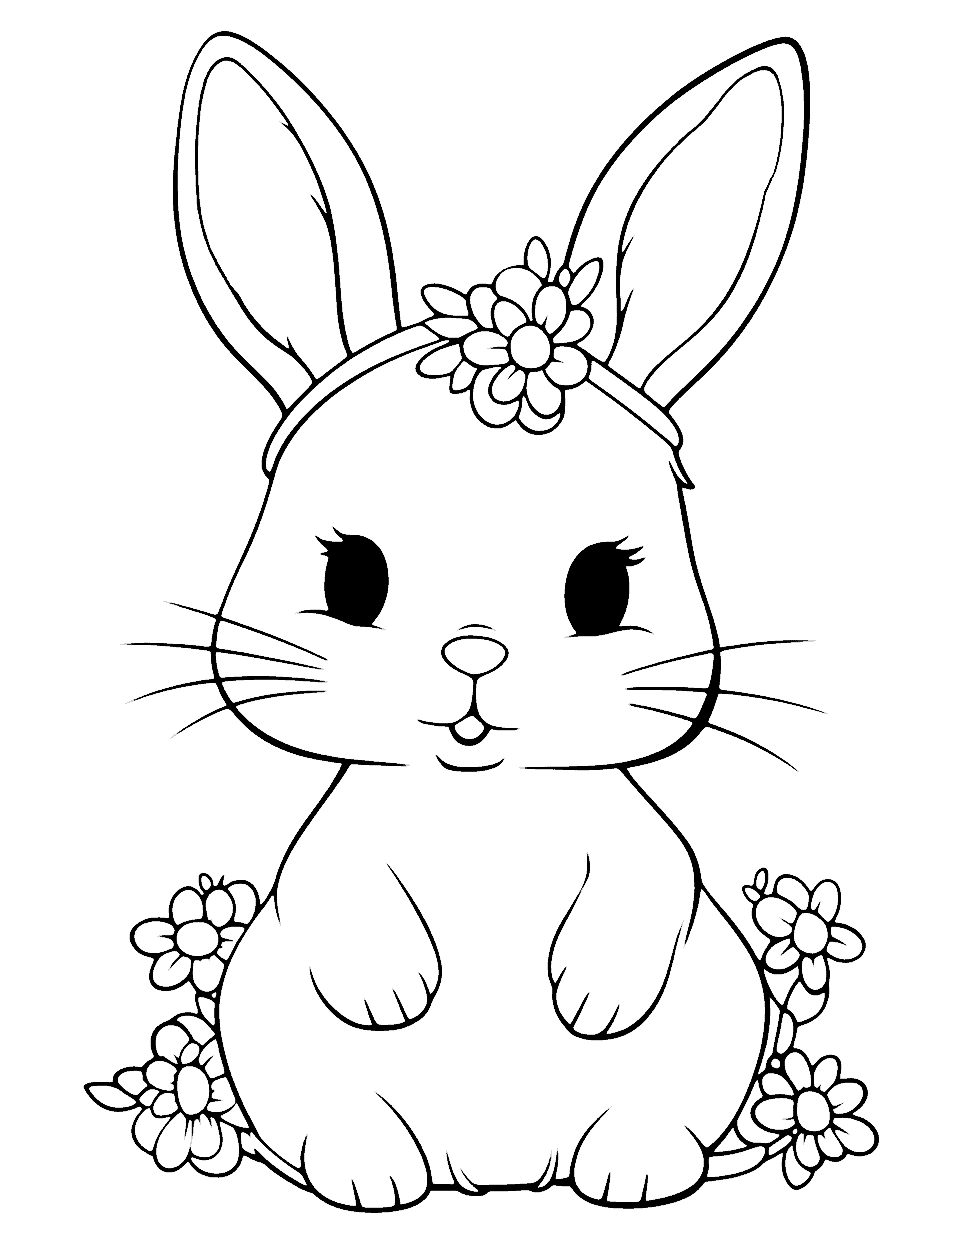 Bunny With a Flower Crown Cute Coloring Page - A cute bunny wearing a crown made of beautiful flowers.